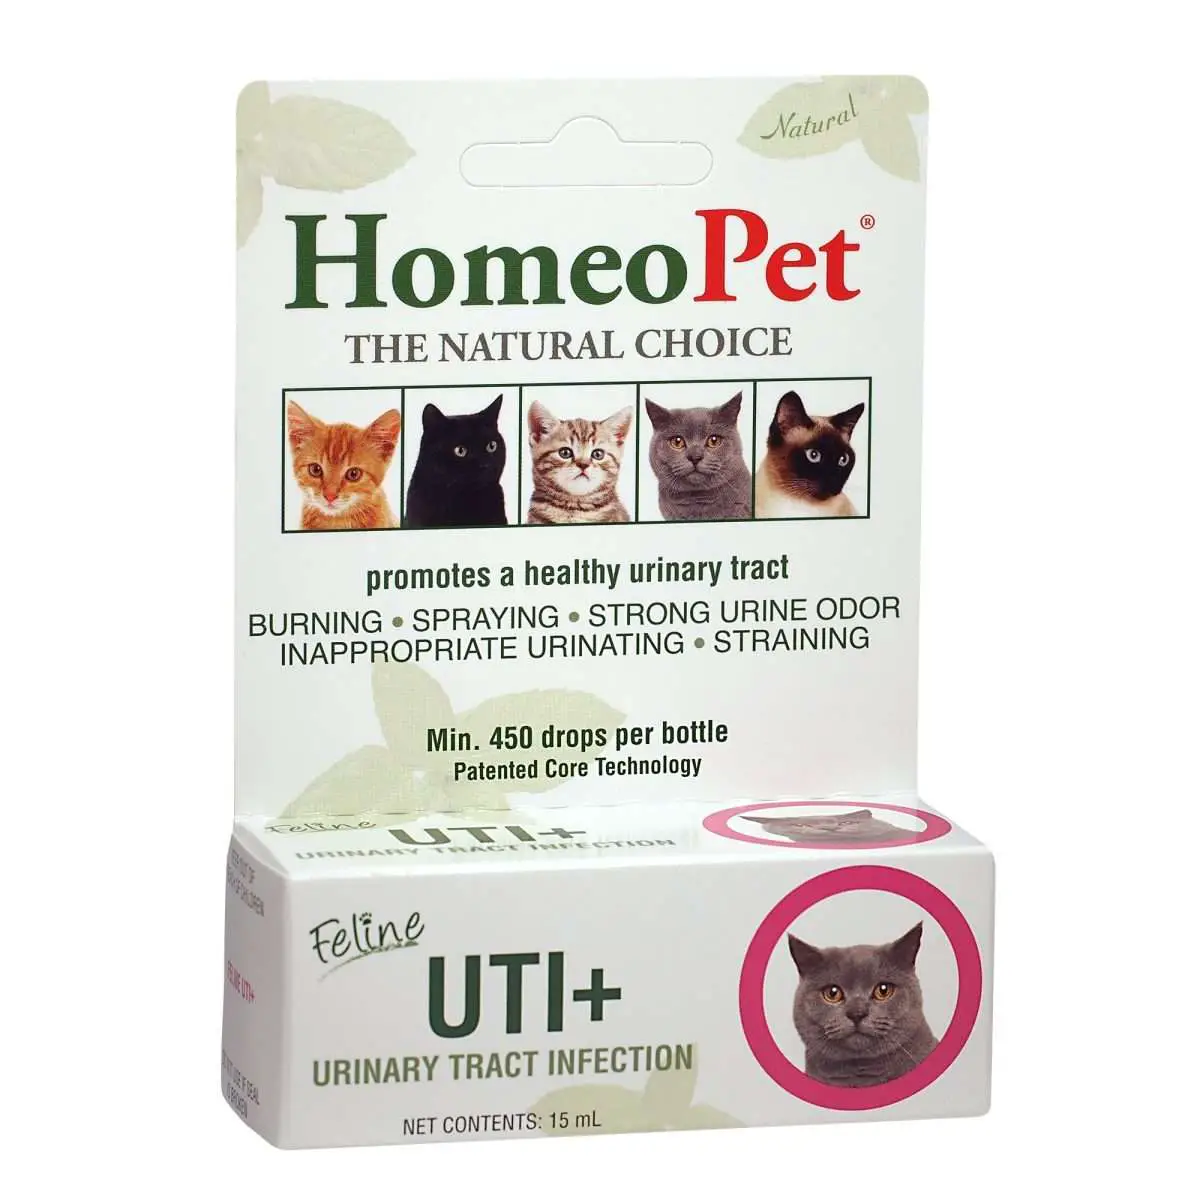 HomeoPet Feline Urinary Tract Infection Supplement